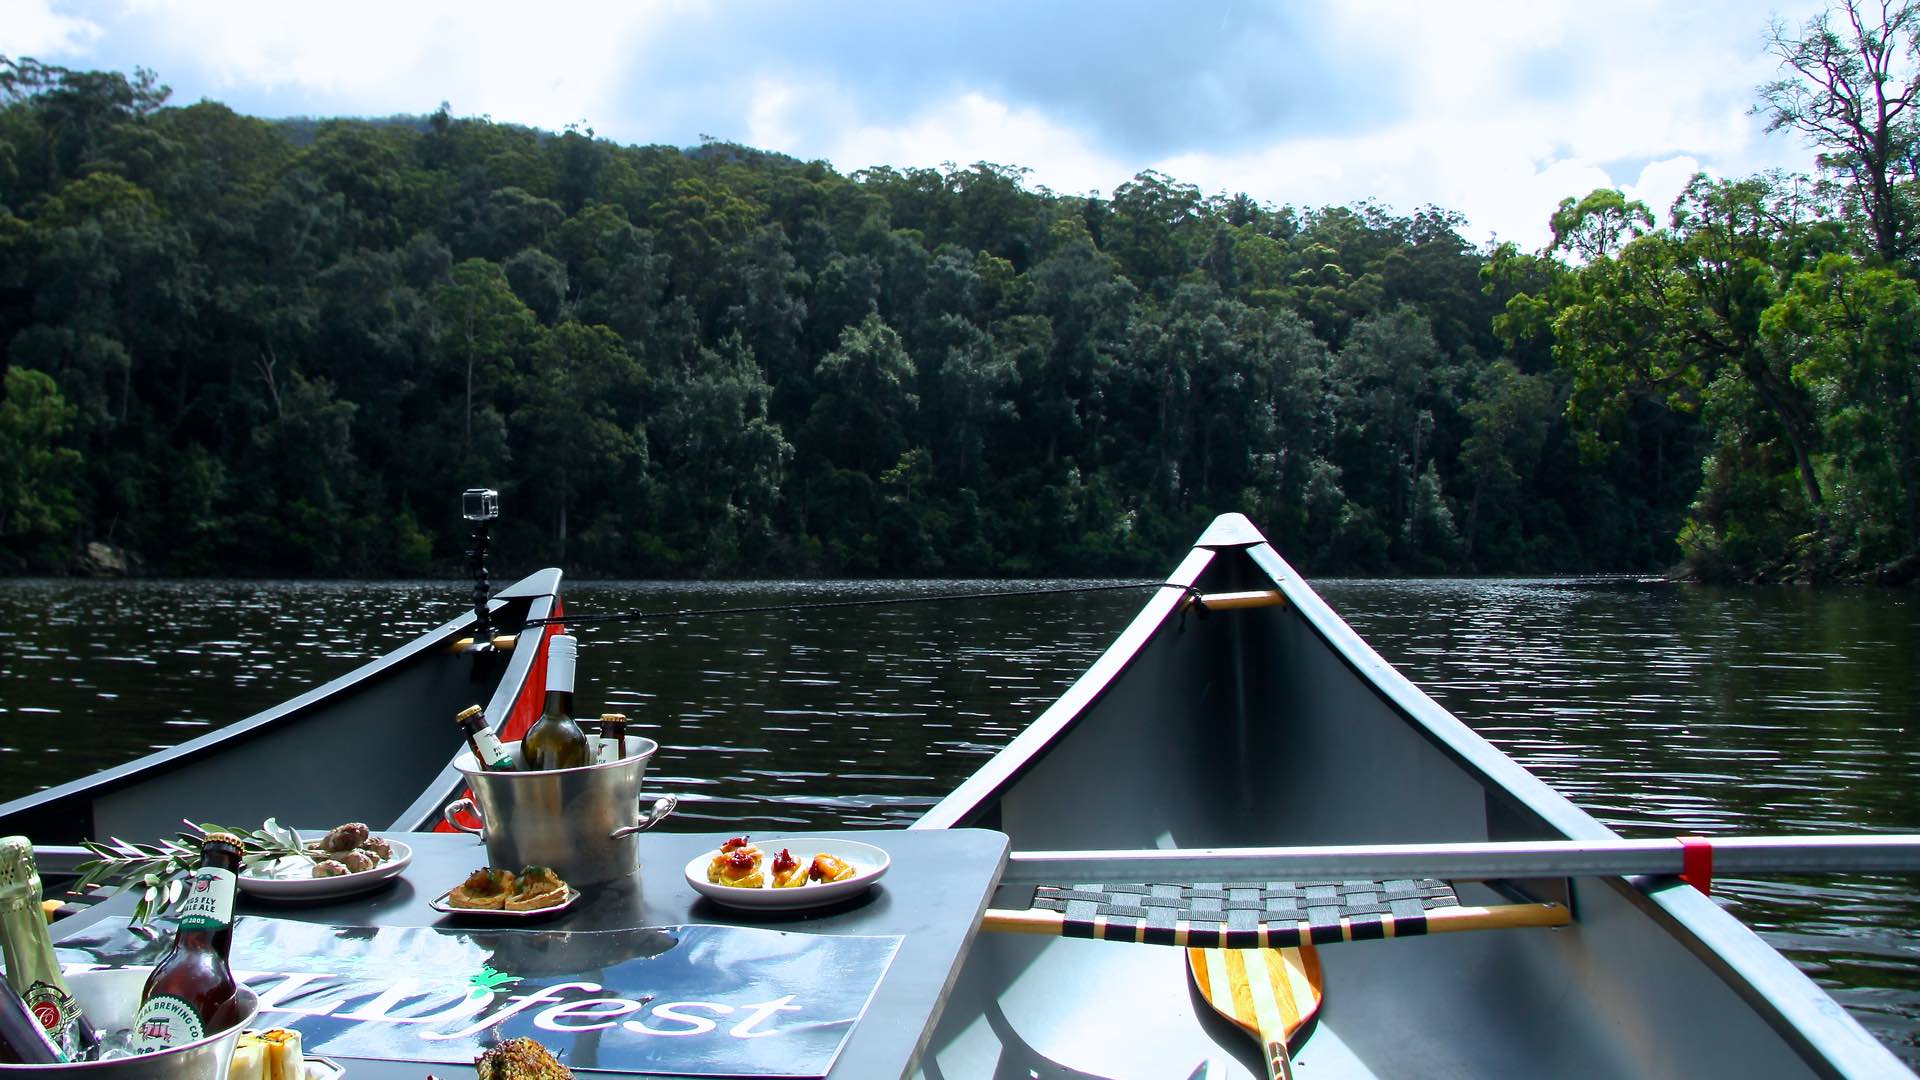 This NSW Outdoor Experience Combines Canoeing with Champagne and Canapés